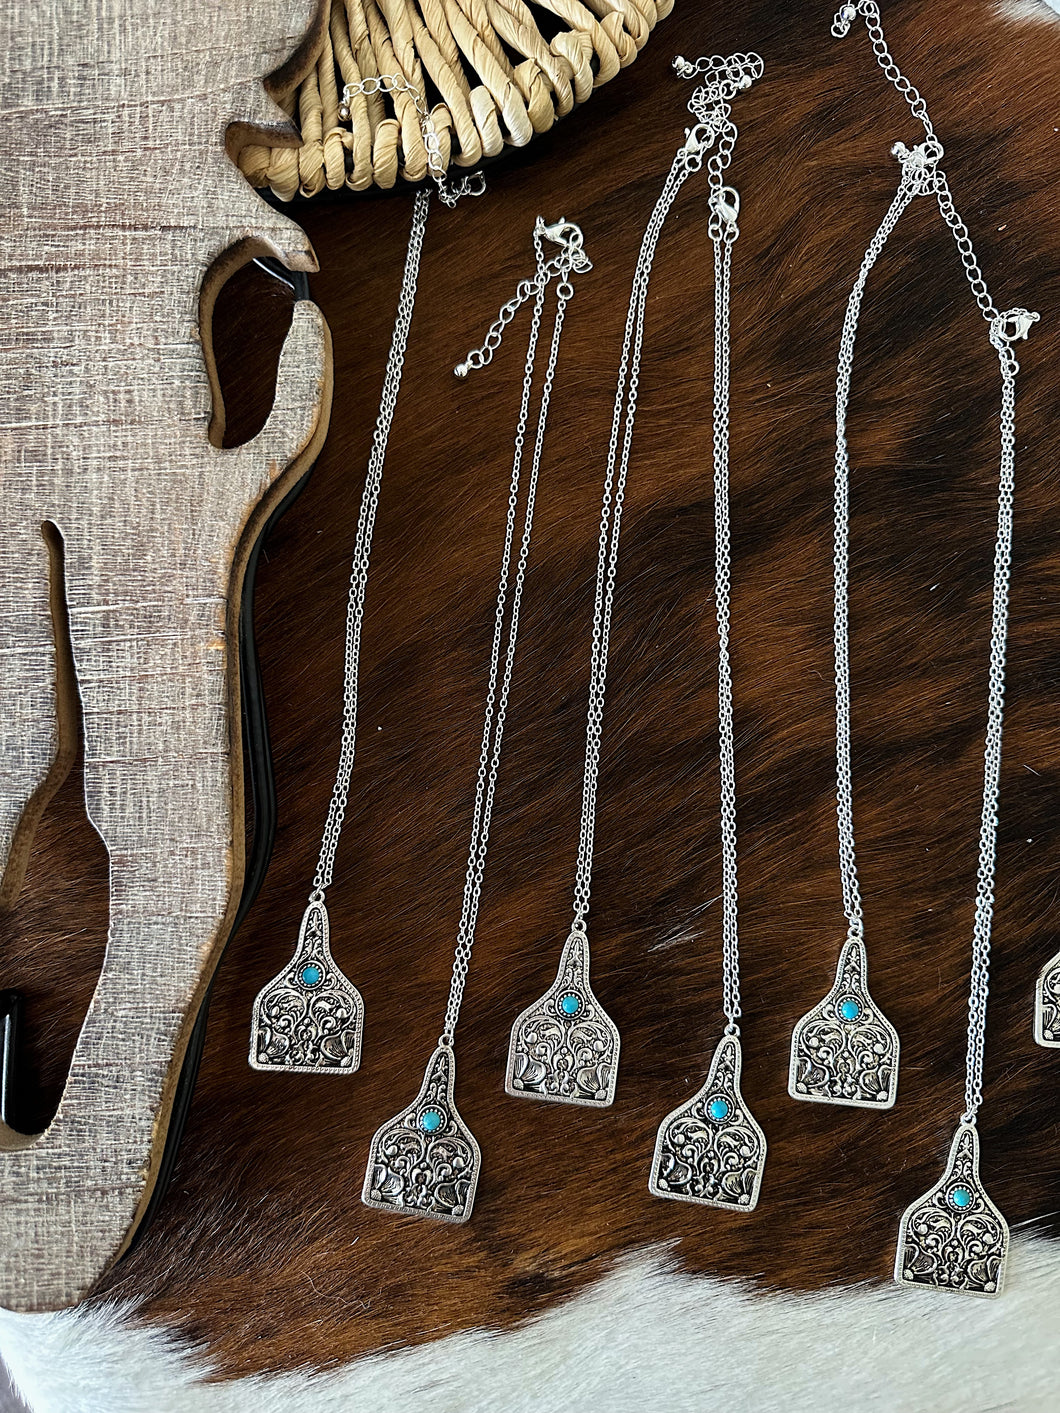 The Tooled Cattle Tag Necklace